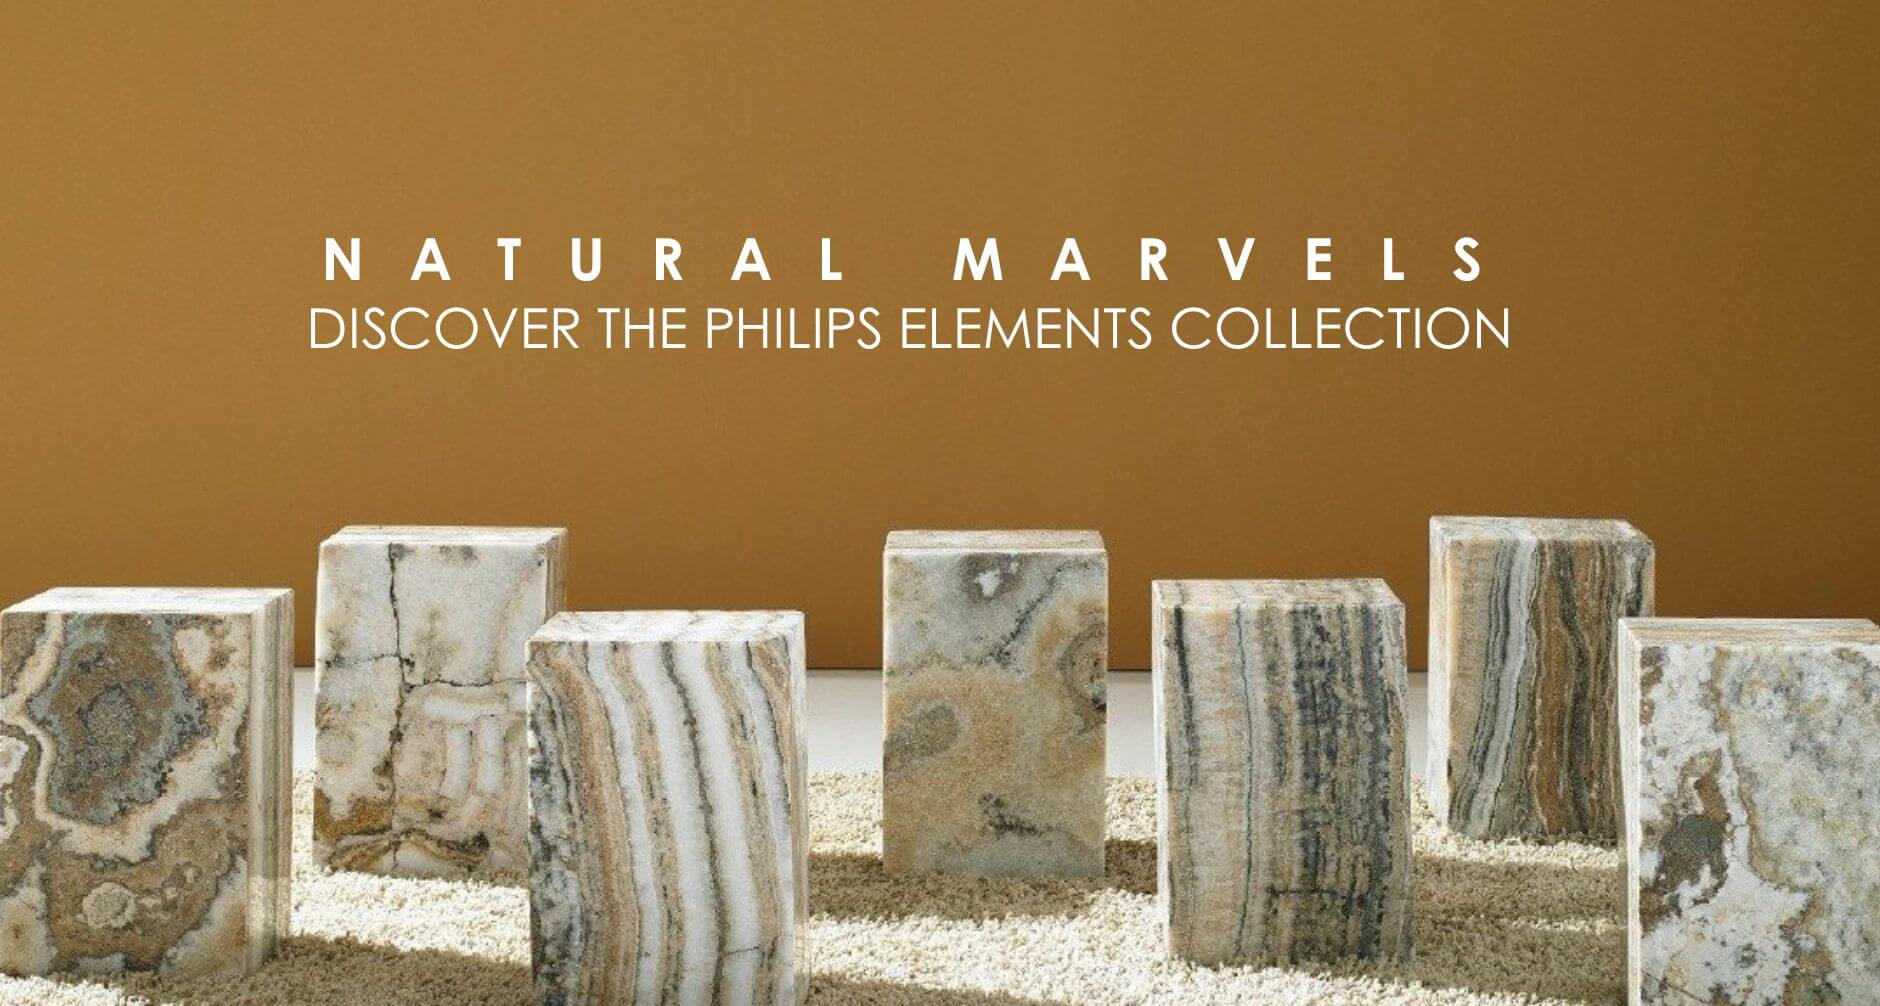 The Philips Elements Collection offers a sanctuary amidst the chaos of daily life, celebrating the timeless beauty of nature through its meticulously crafted furnishings.